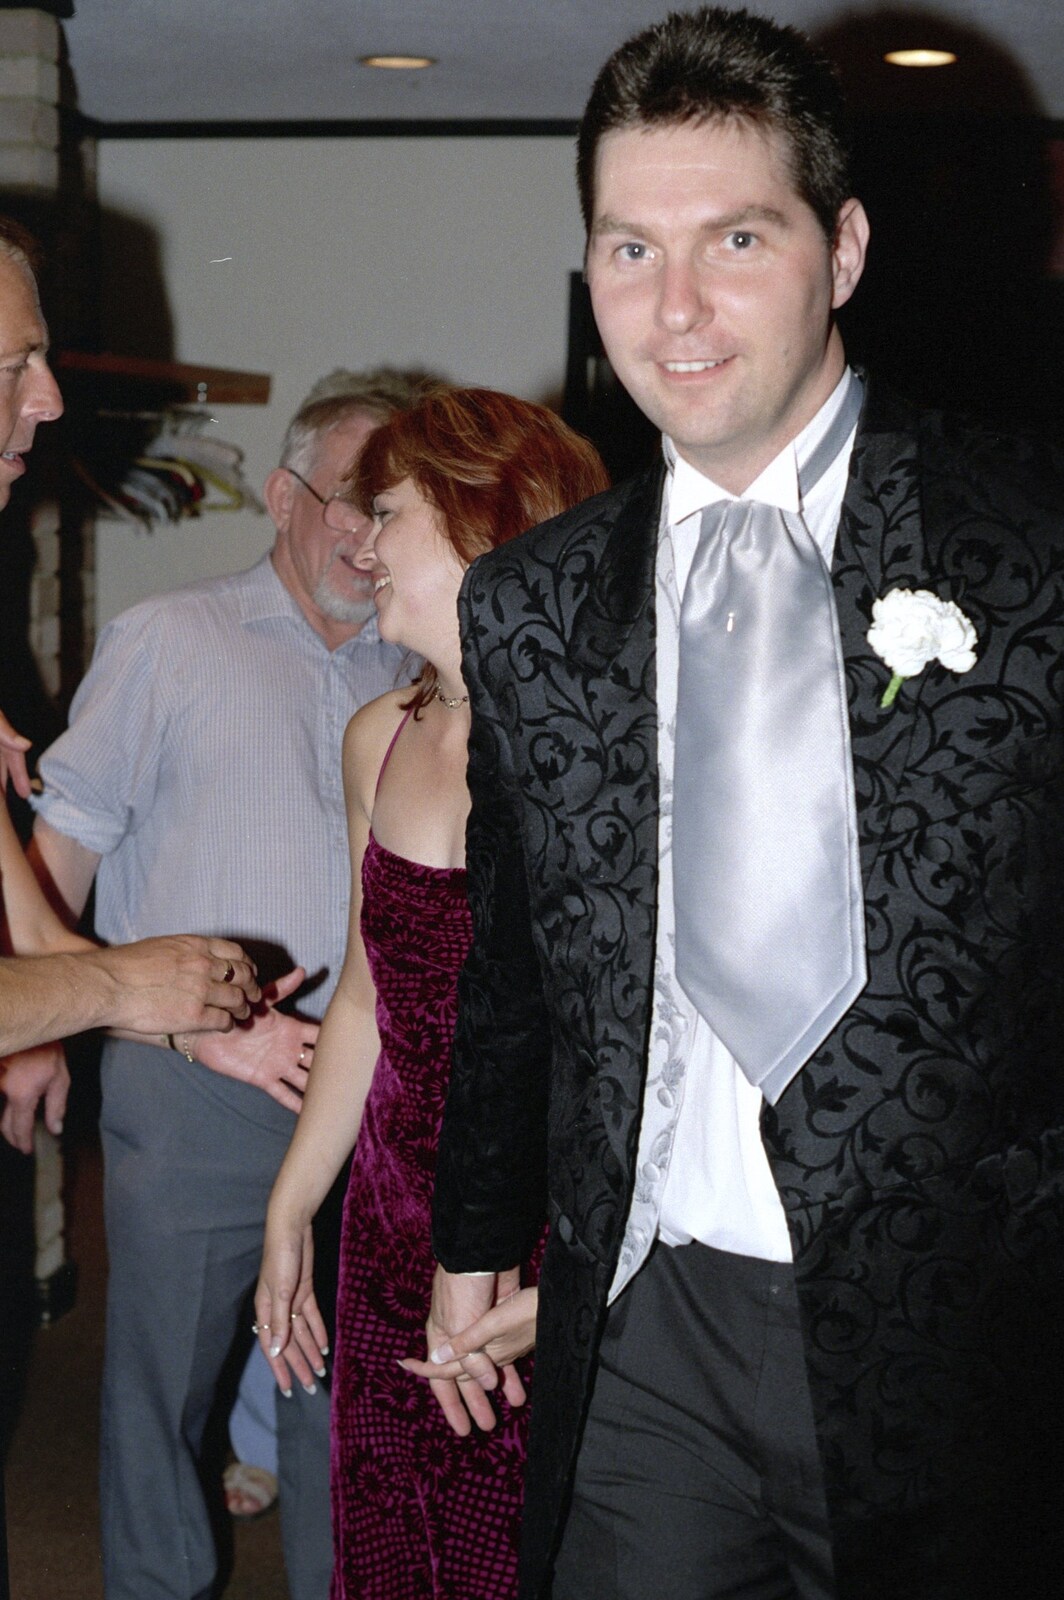 Sean leads Michelle out of the reception from Sean and Michelle's Wedding, Bashley FC, New Milton - 12th August 2000